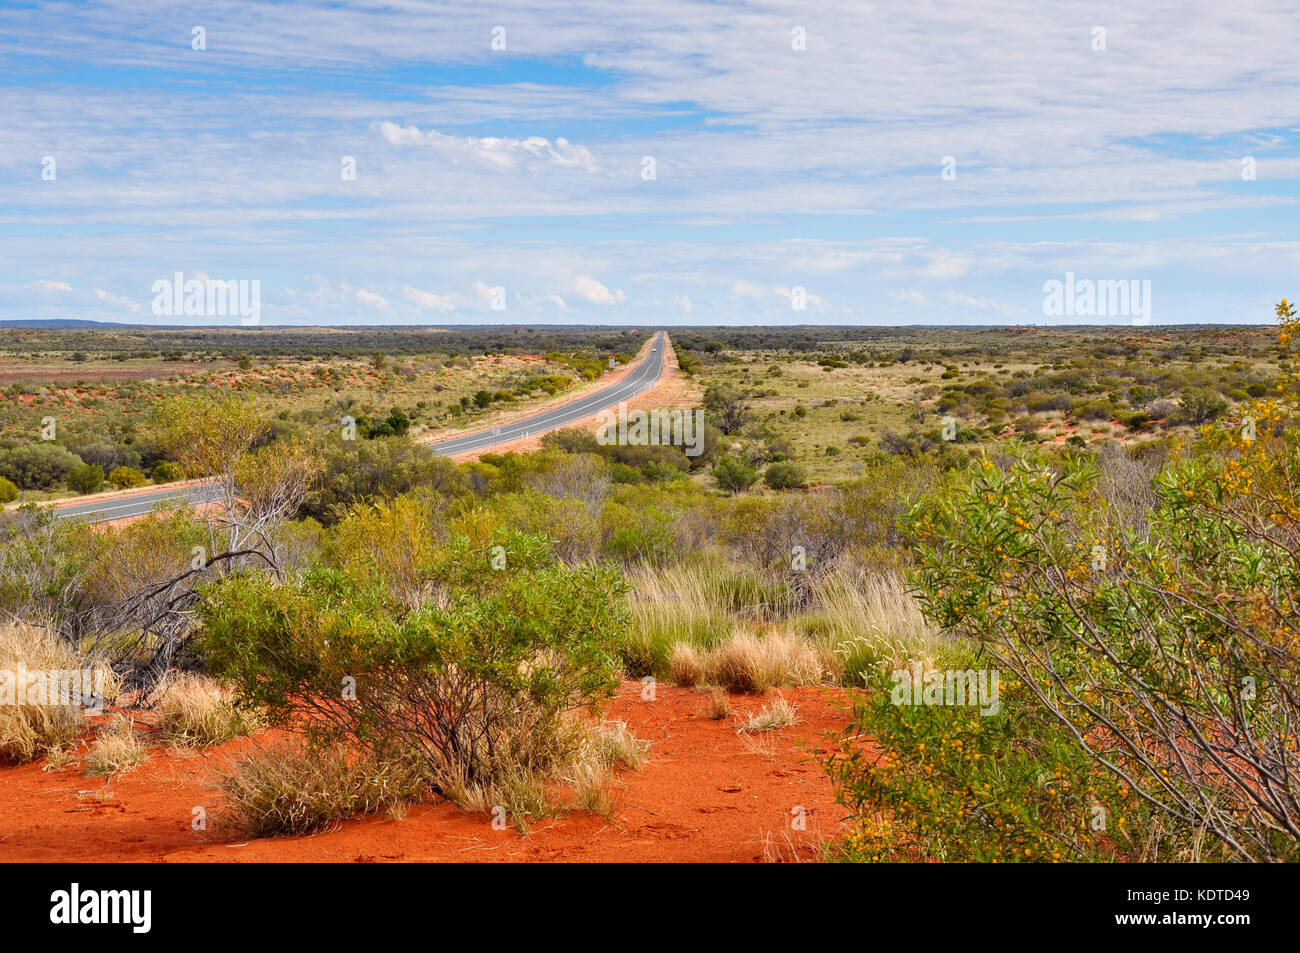 A road disappearing into the distance near Uluru in Australia Stock Photo